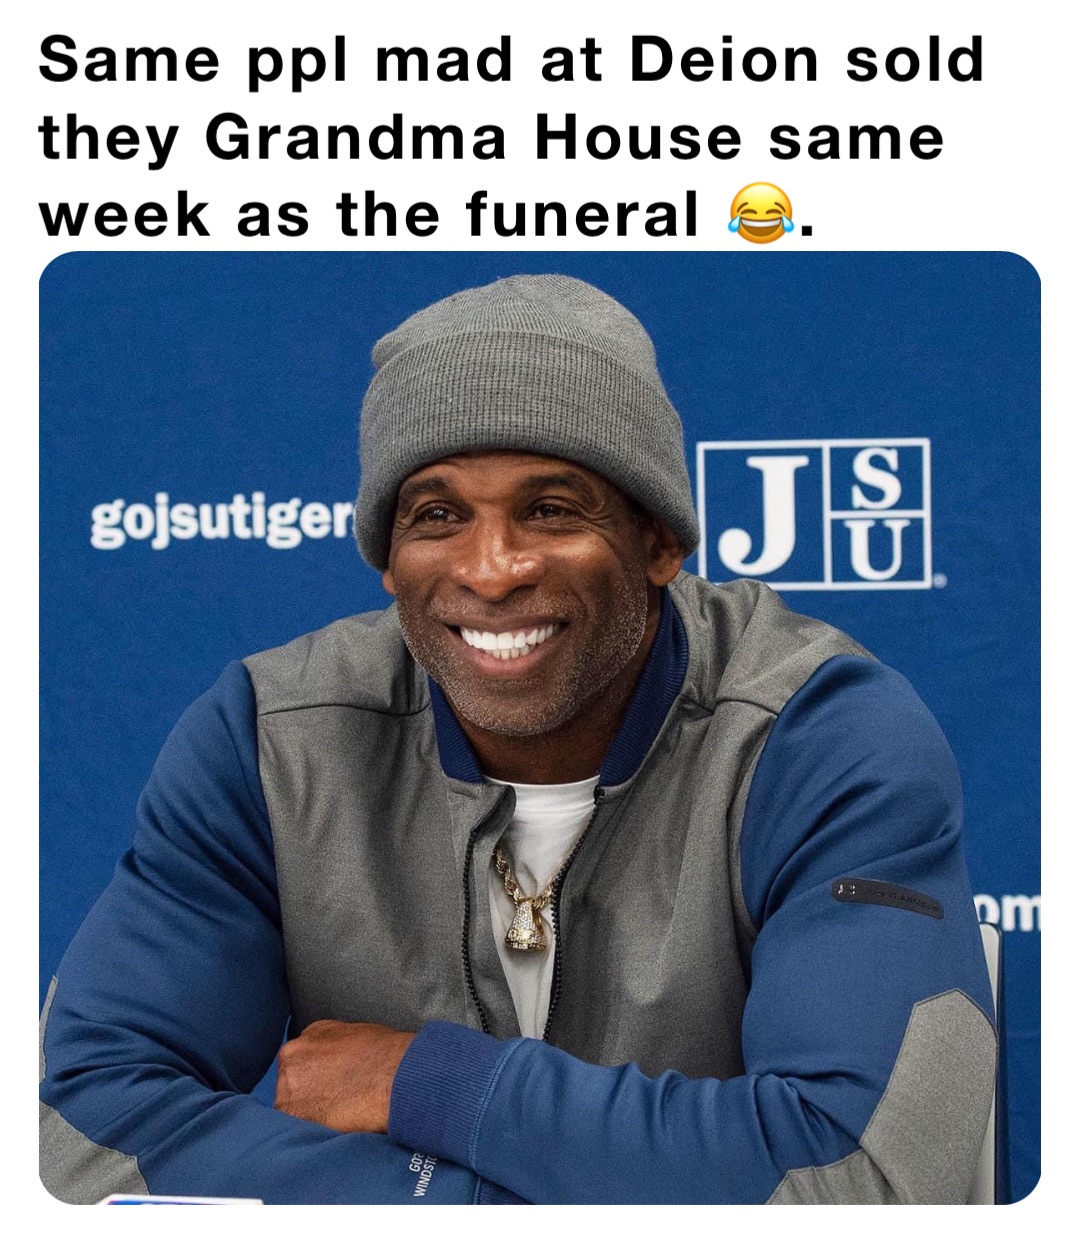 Same ppl mad at Deion sold they Grandma House same week as the funeral 😂.